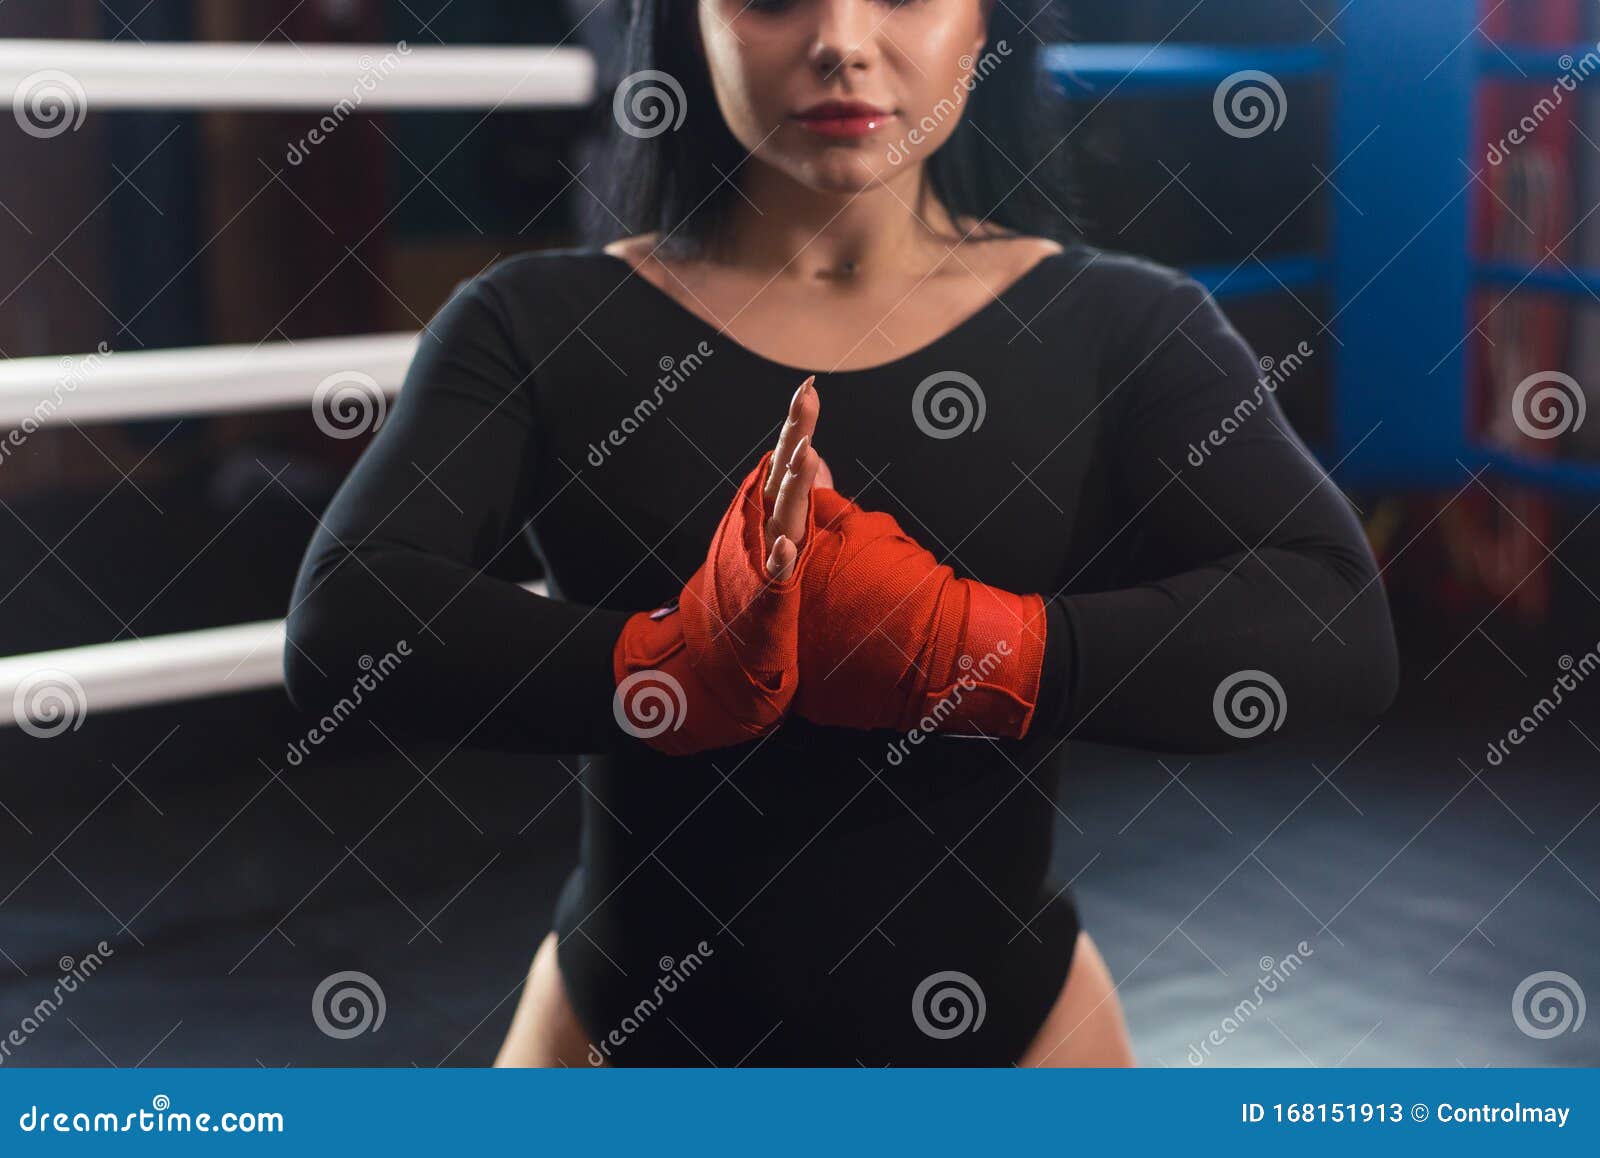 Boxer Woman Hands With Red Boxing Wraps In The Boxing Ring Close Up Shot Stock Image Image Of